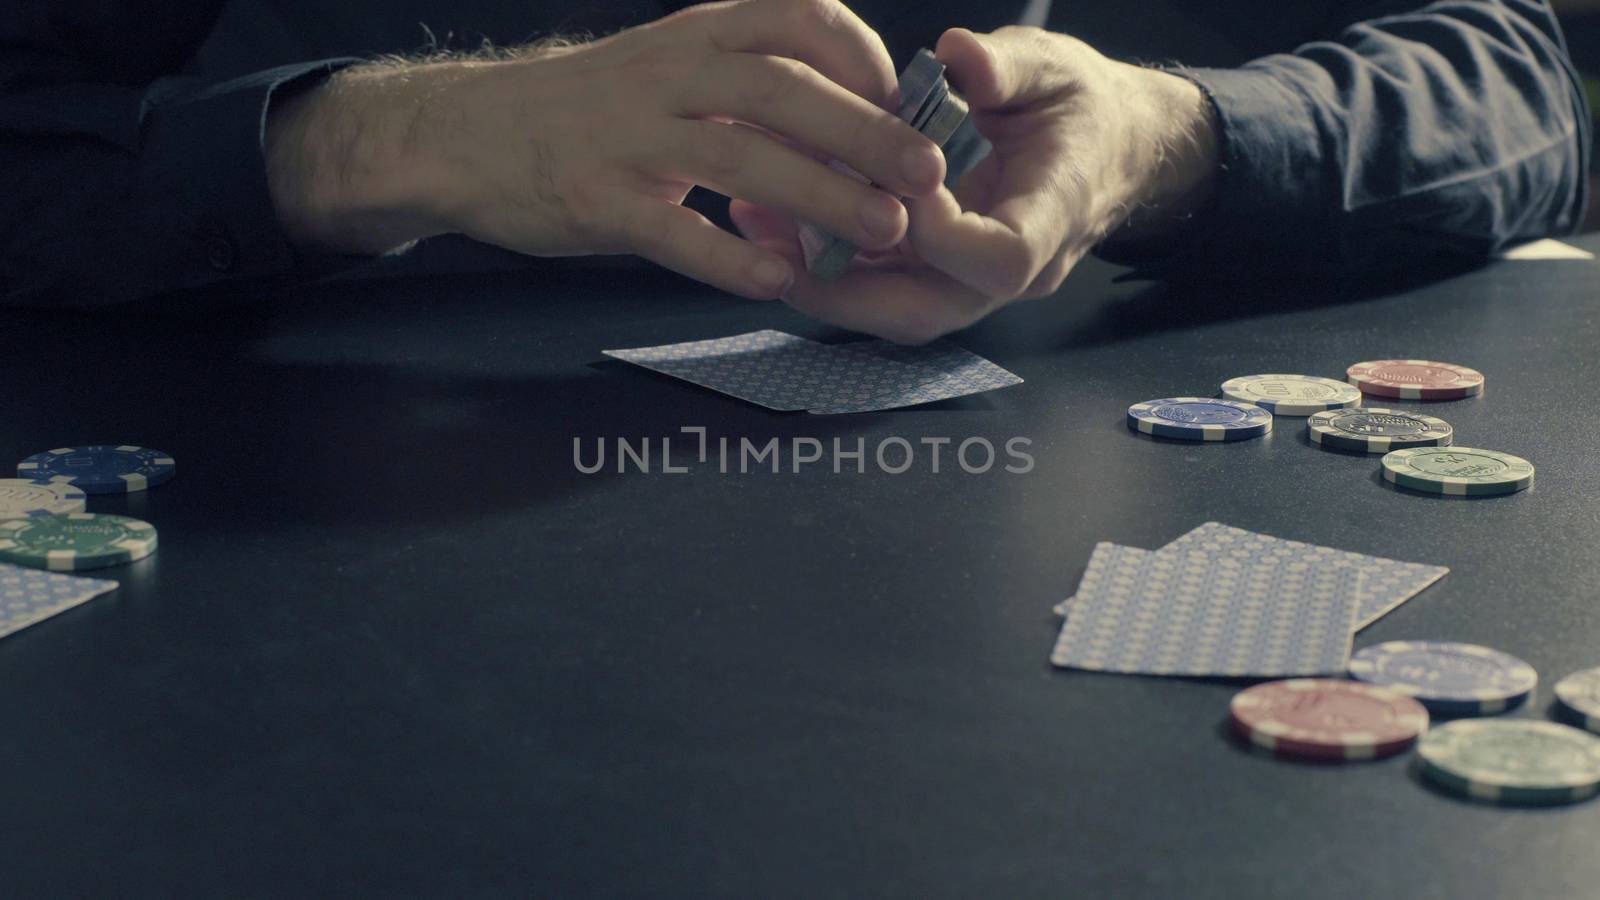 Poker game - dealing cards. Man's hands dealing cards and chips. Close up